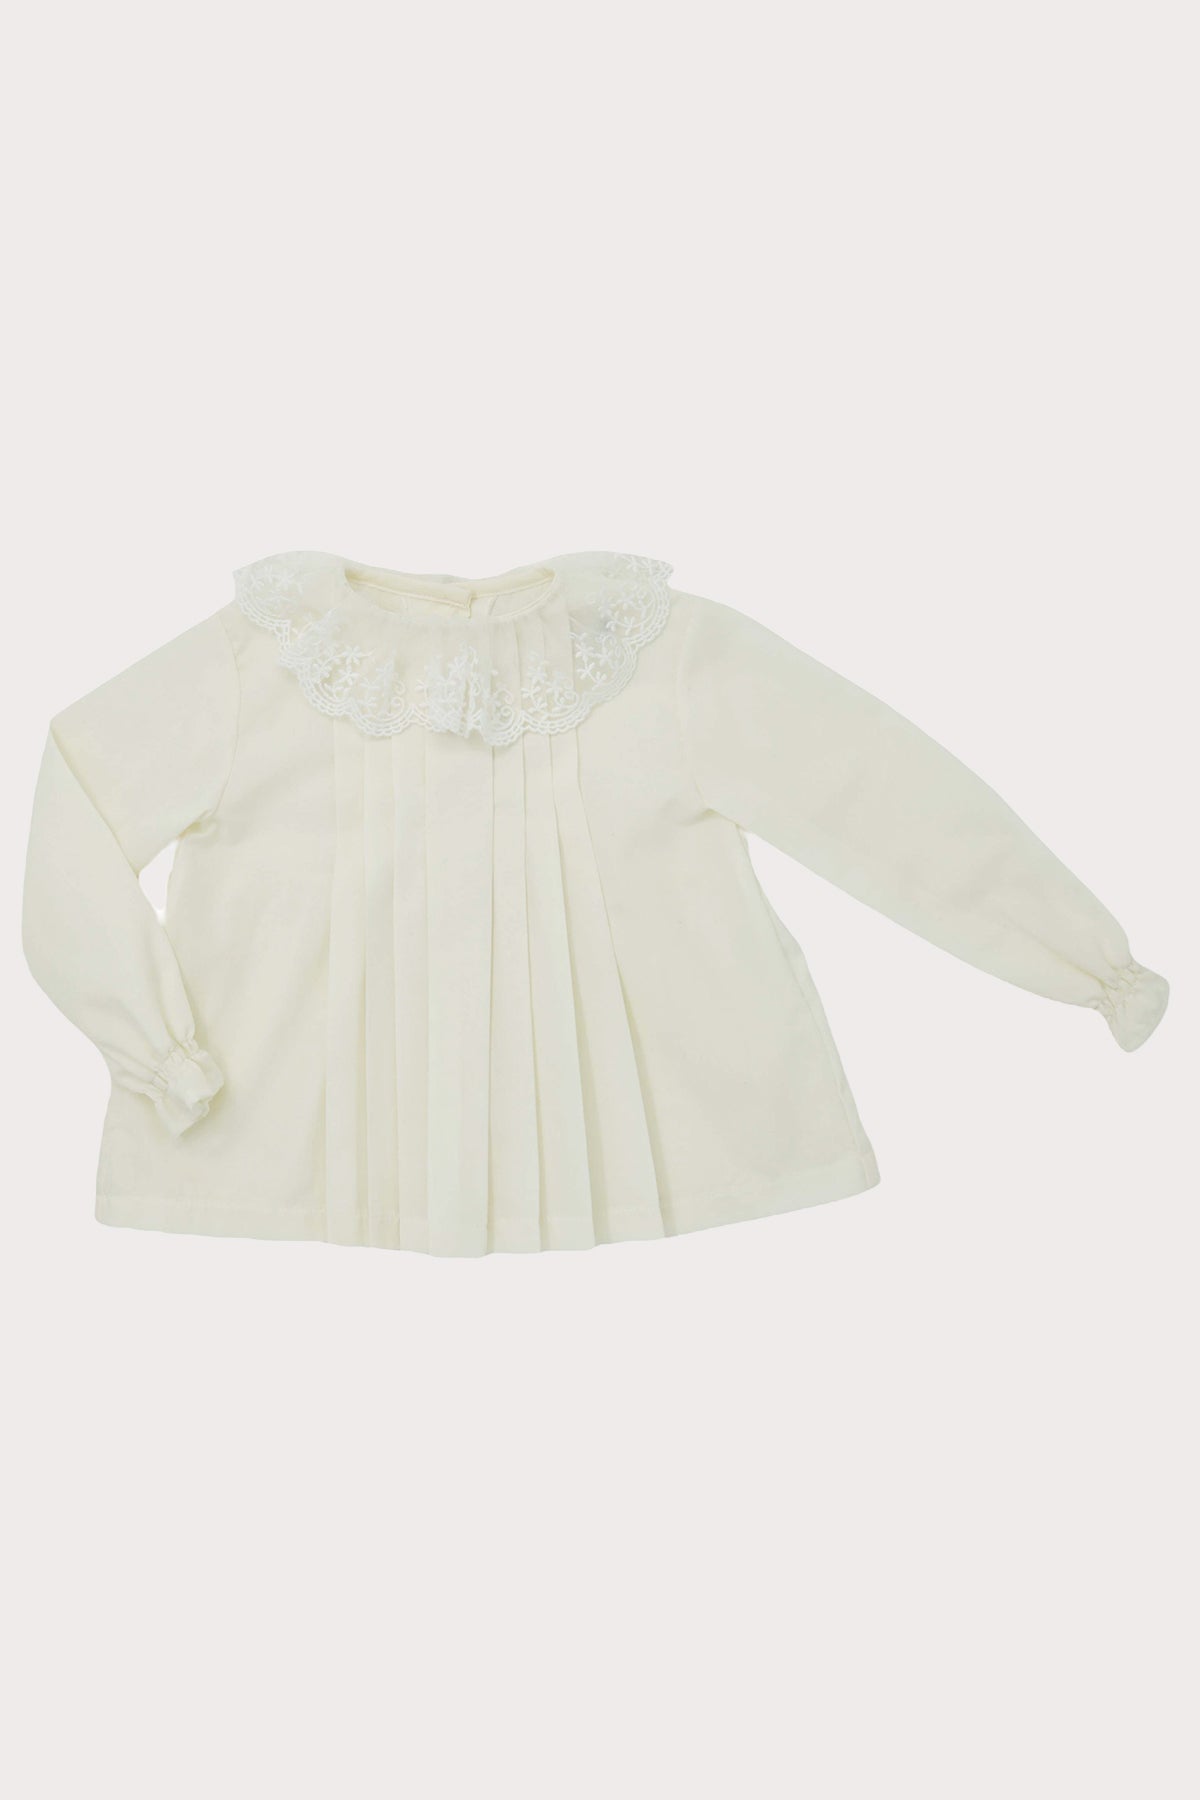 ivory lace collar girls blouse